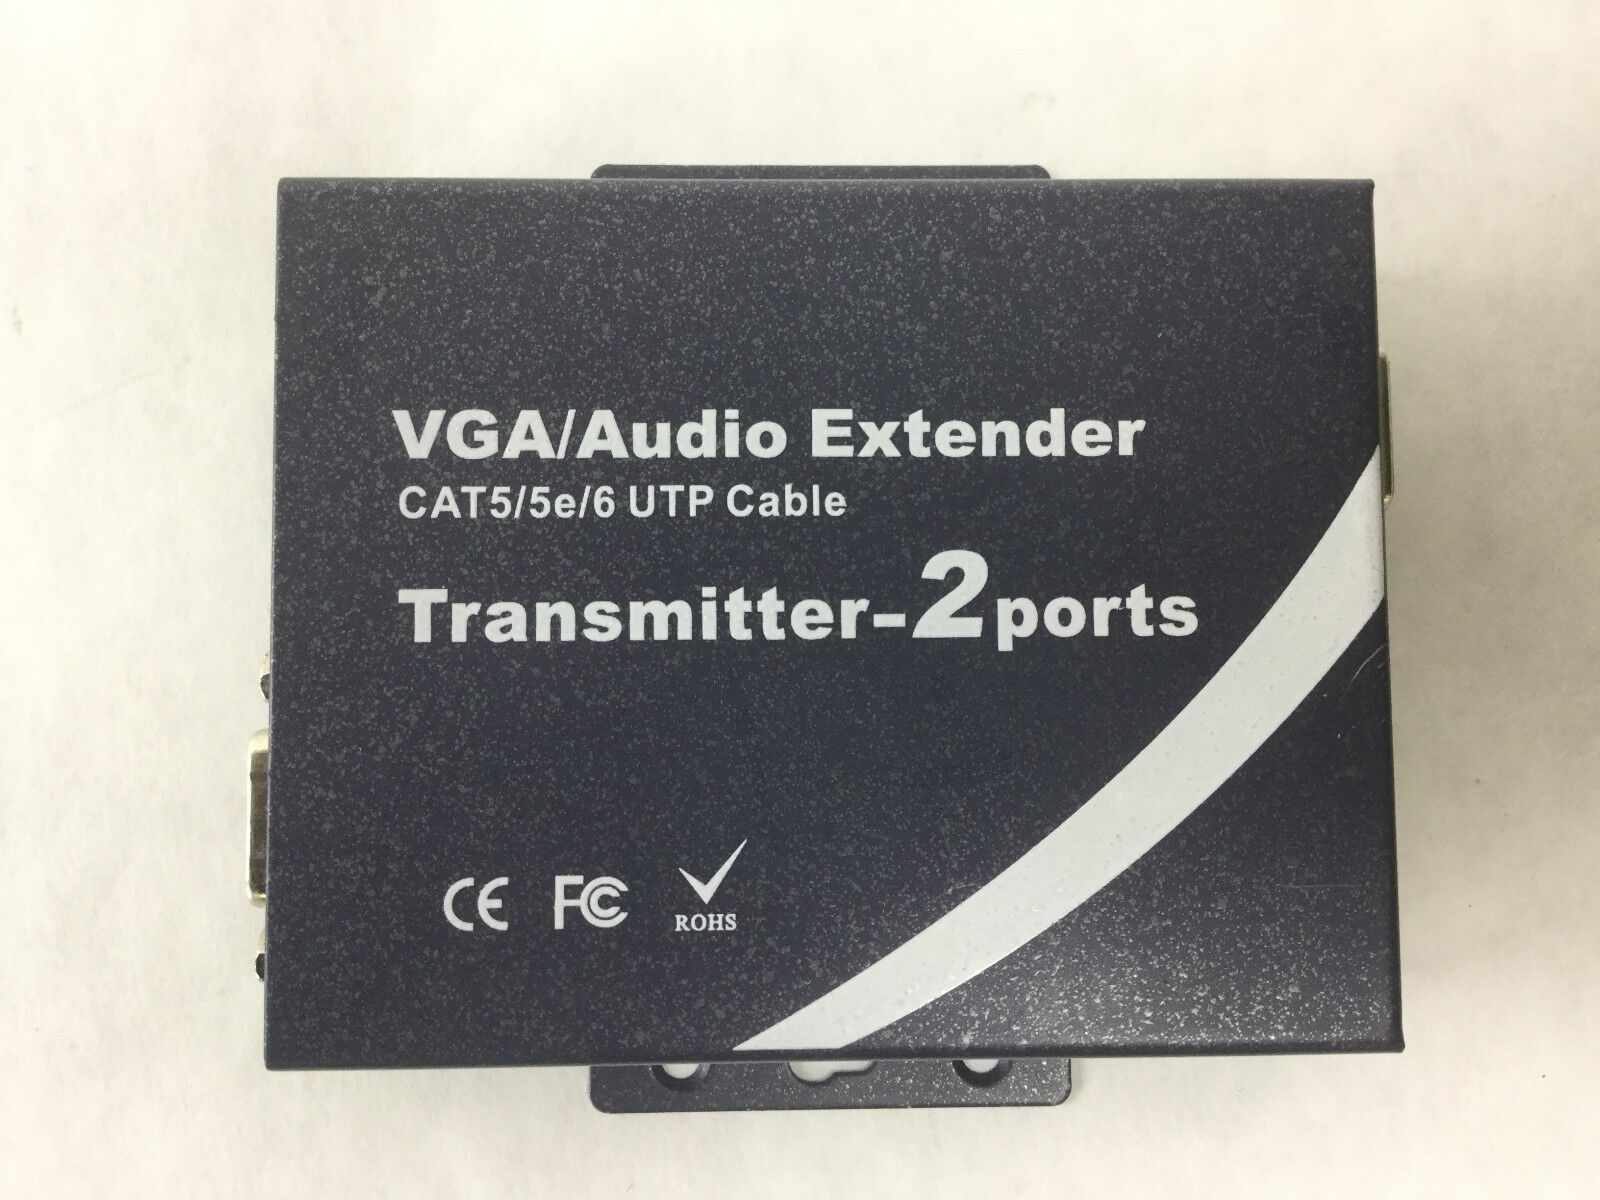 VGA/Audio Extender 1Transmitter-2ports(CAT5/5e/6 UTP Cable)w/Power Supply&Cables